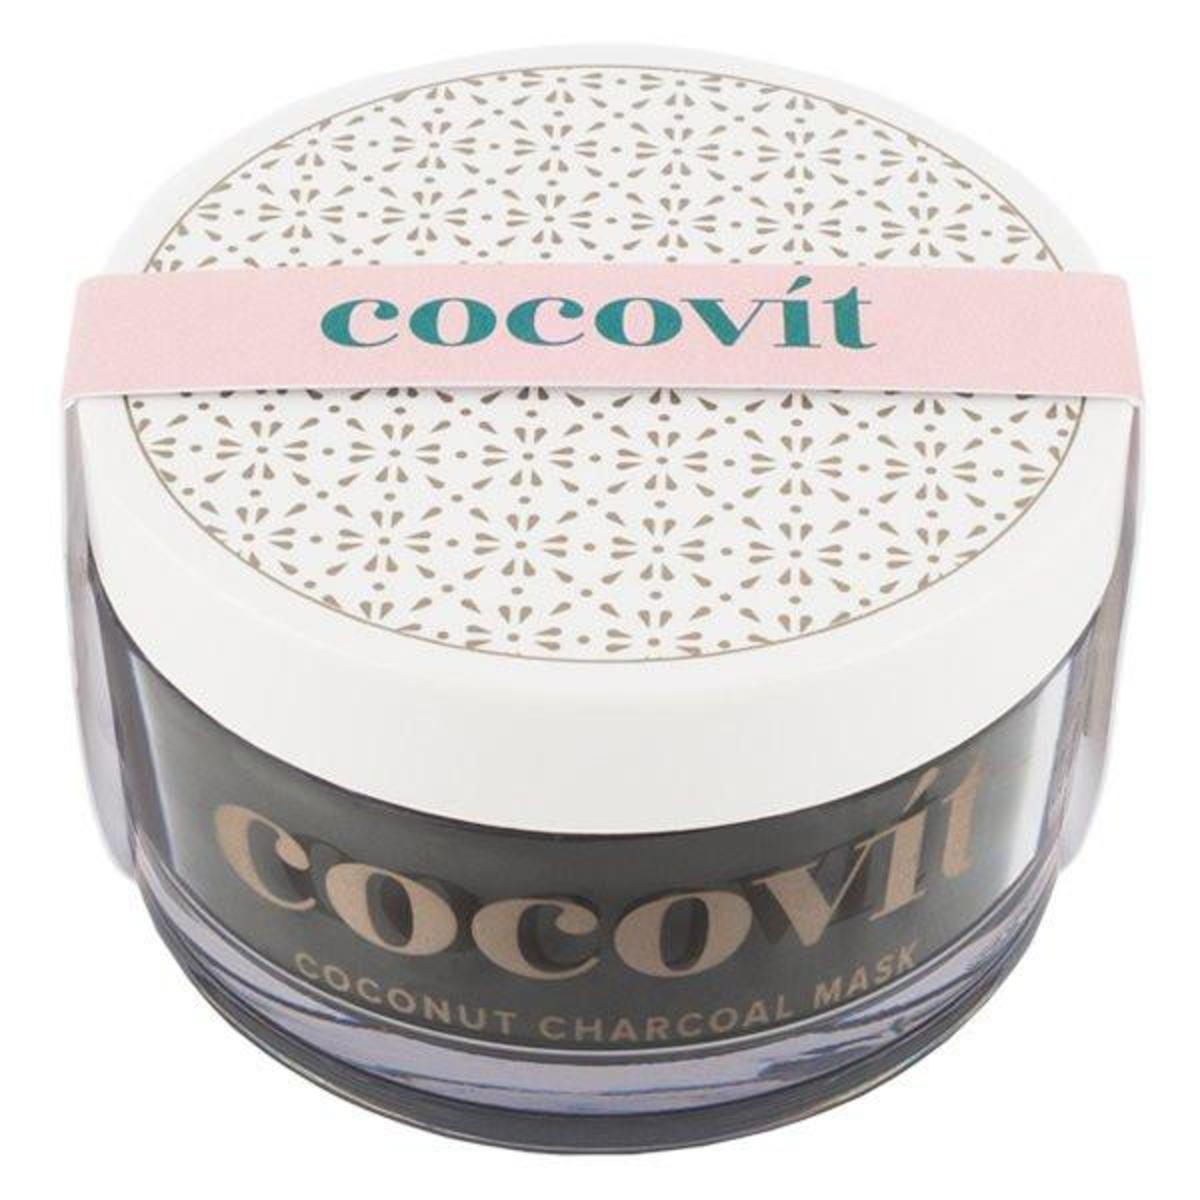 Cocovit Coconut Charcoal Face Mask